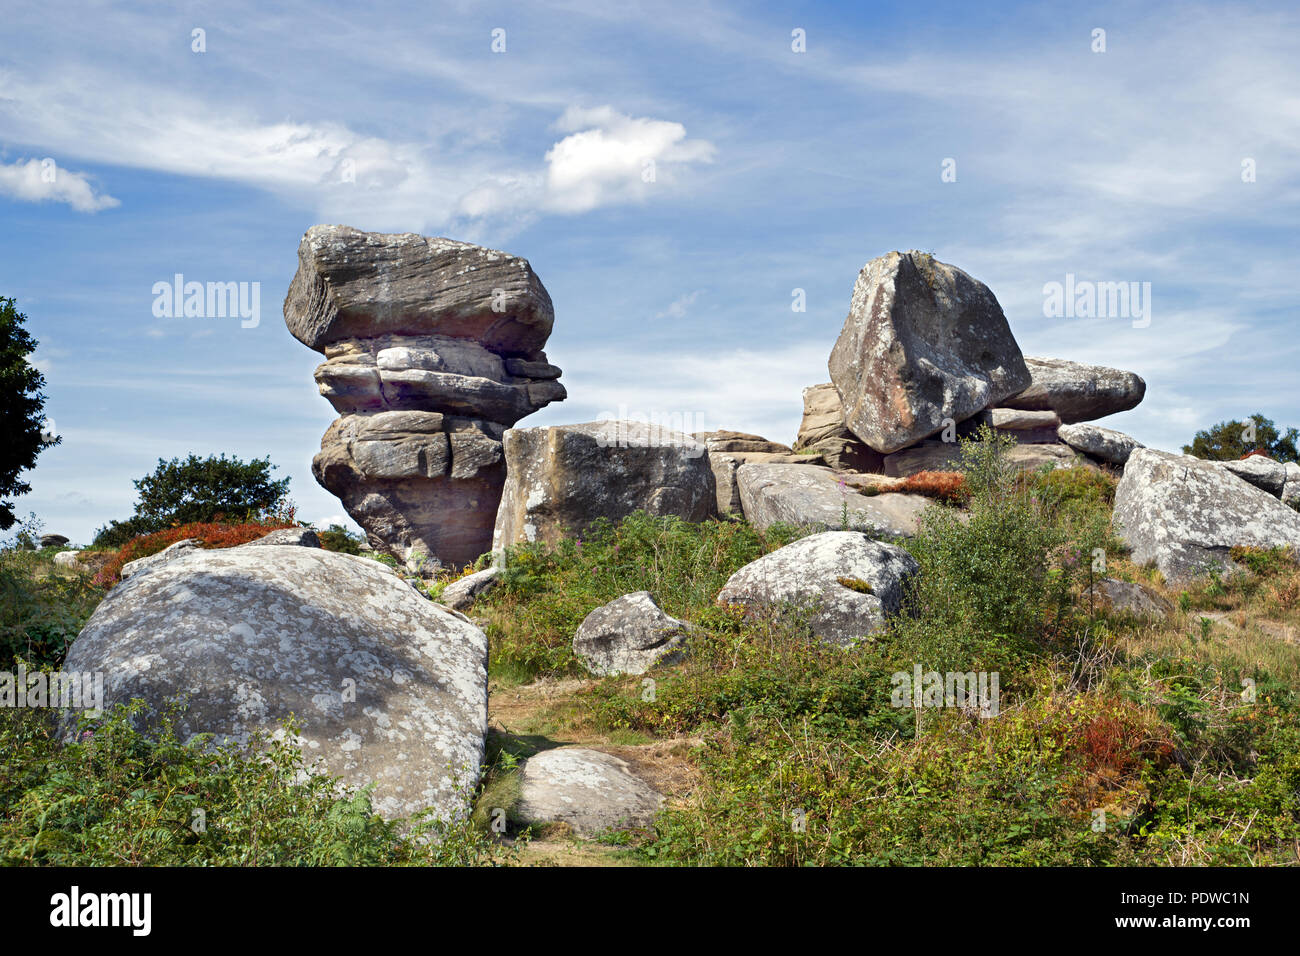 Brimham Rocks is a stunning collection of natural millstone rock formations in North Yorkshire, managed by the National Trust. Stock Photo